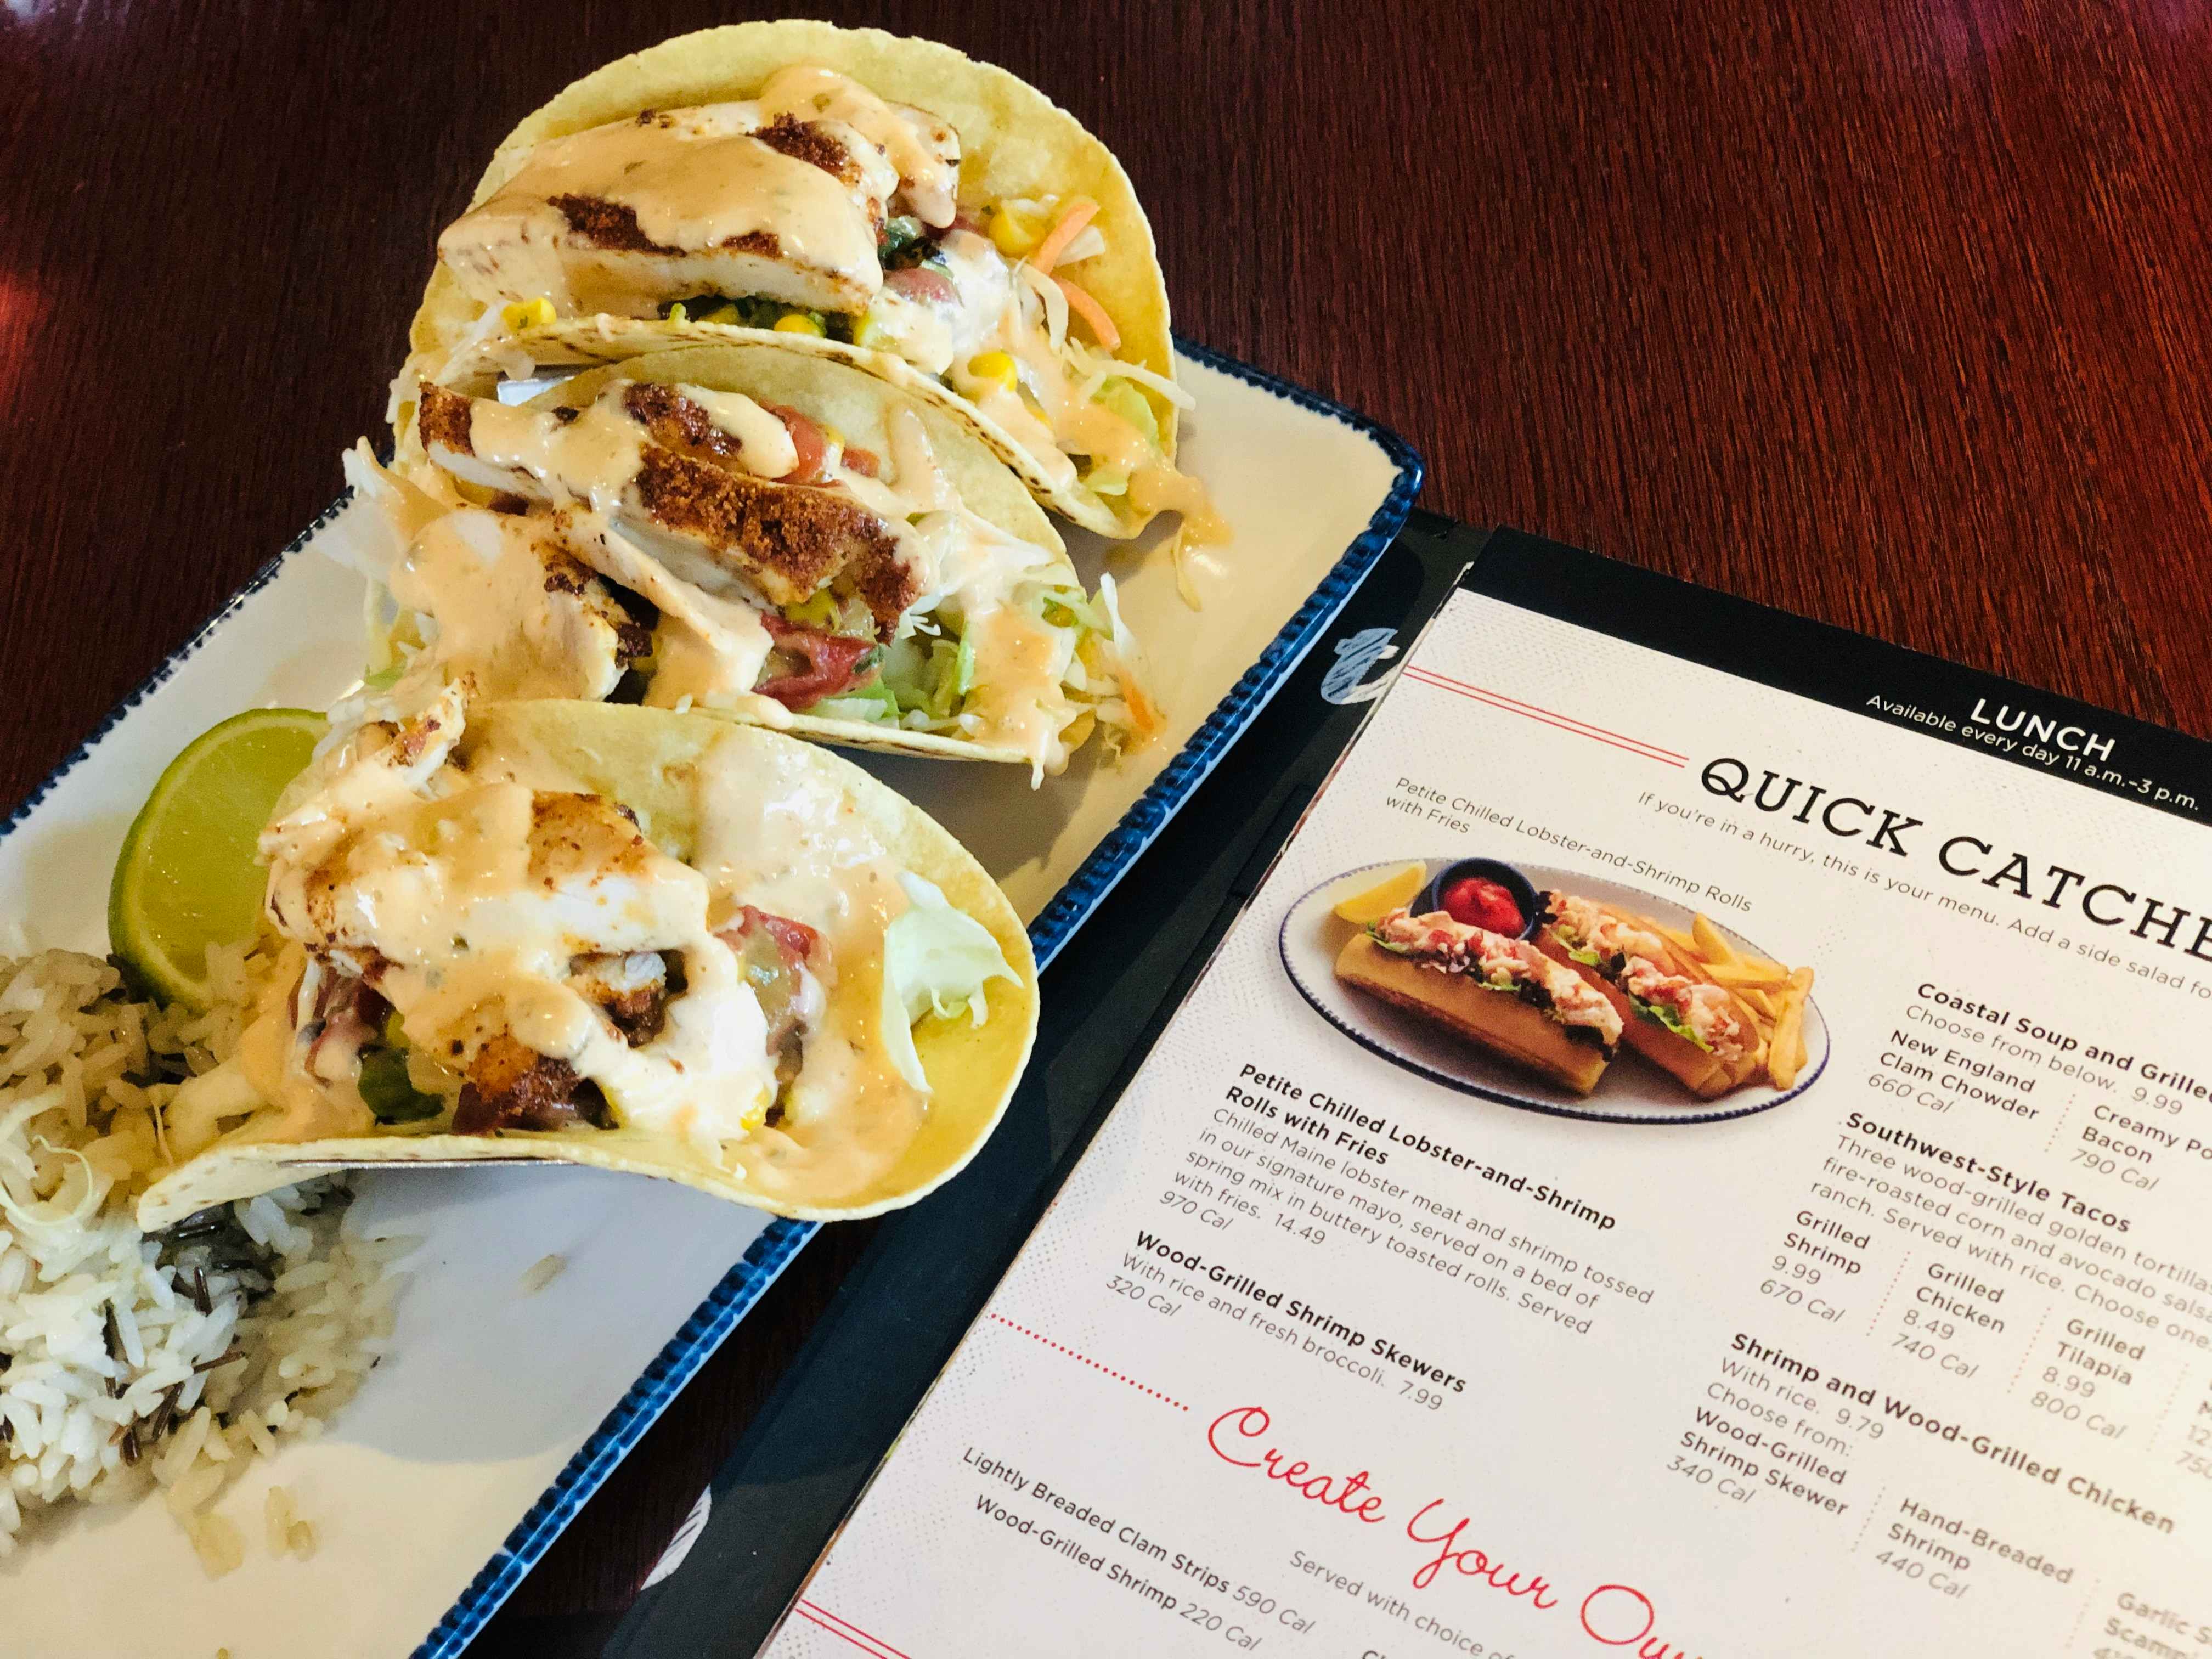 Three Red Lobster Southwest-style tacos sitting on a plate next to a menu open to the Red Lobster lunch options.